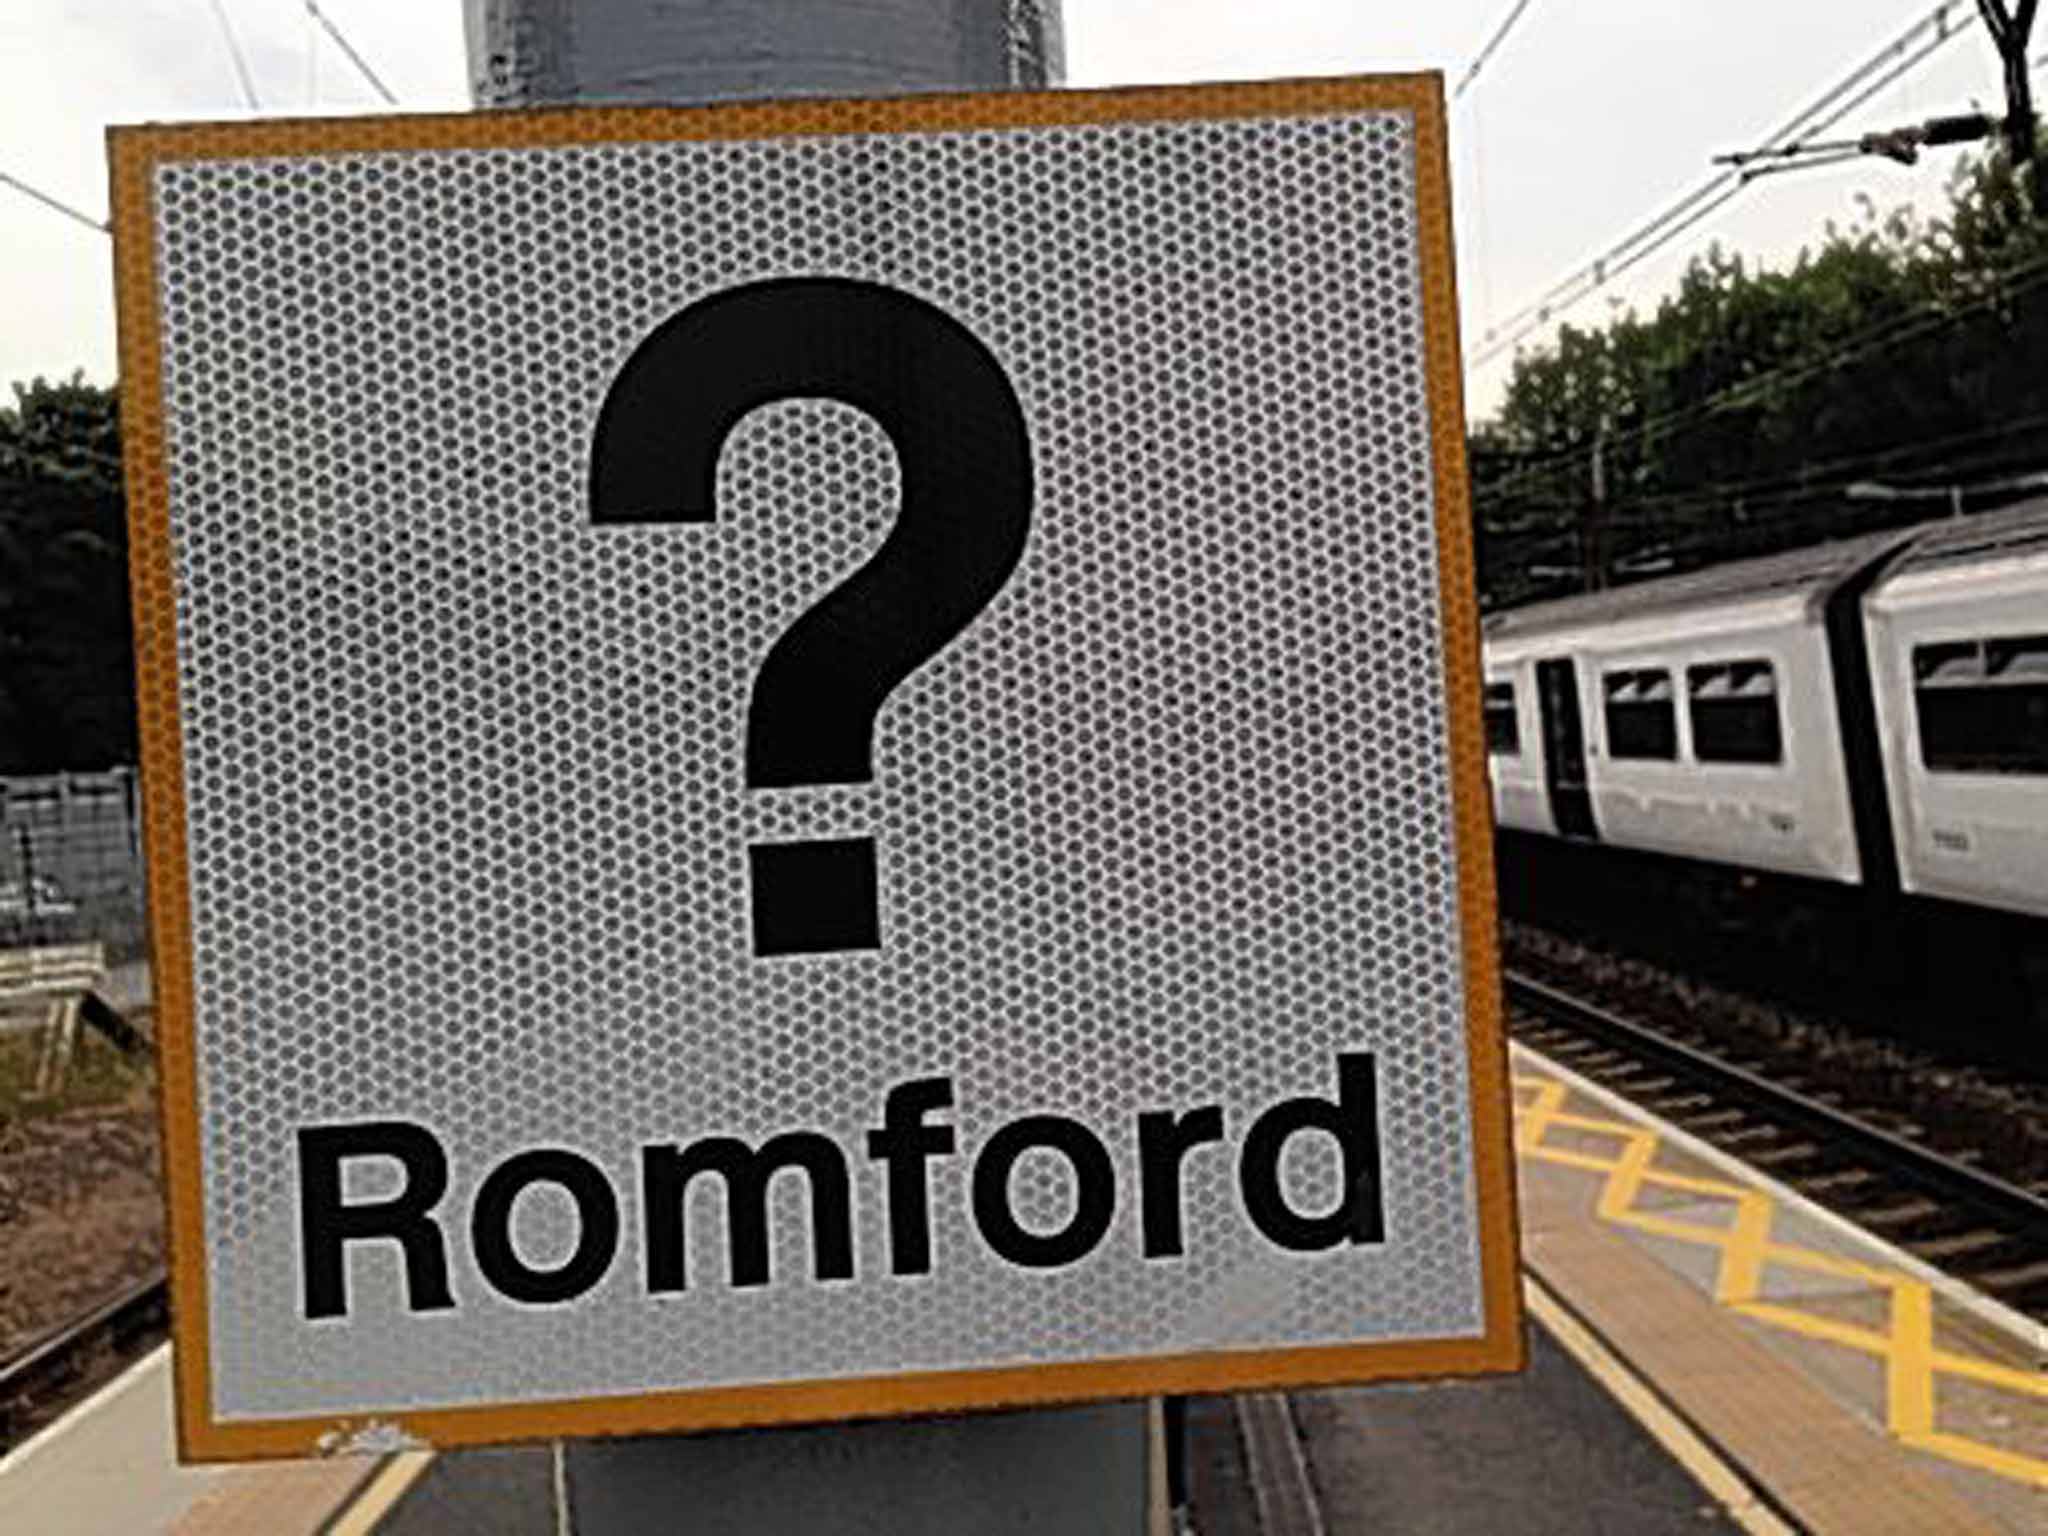 Sign language: Shenfield station’s puzzling board